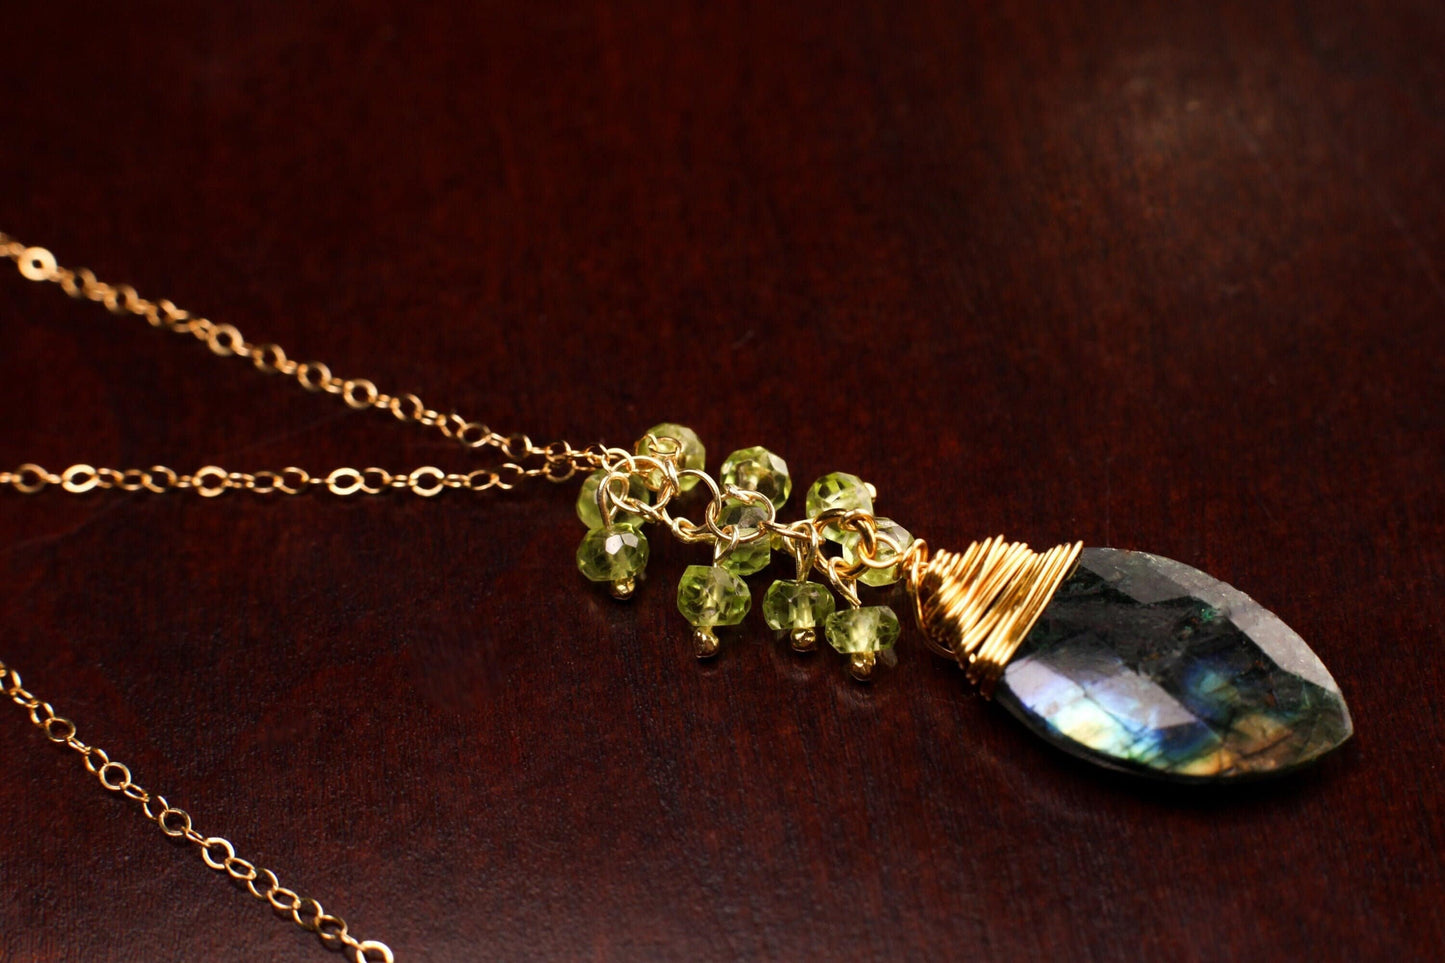 Labradorite Blue Green Flash Faceted Marquise cut Drop 13x24mm, Wire Wrapped Faceted 4mm Peridot Clusters in 14K Gold Filled Clasp and Chain